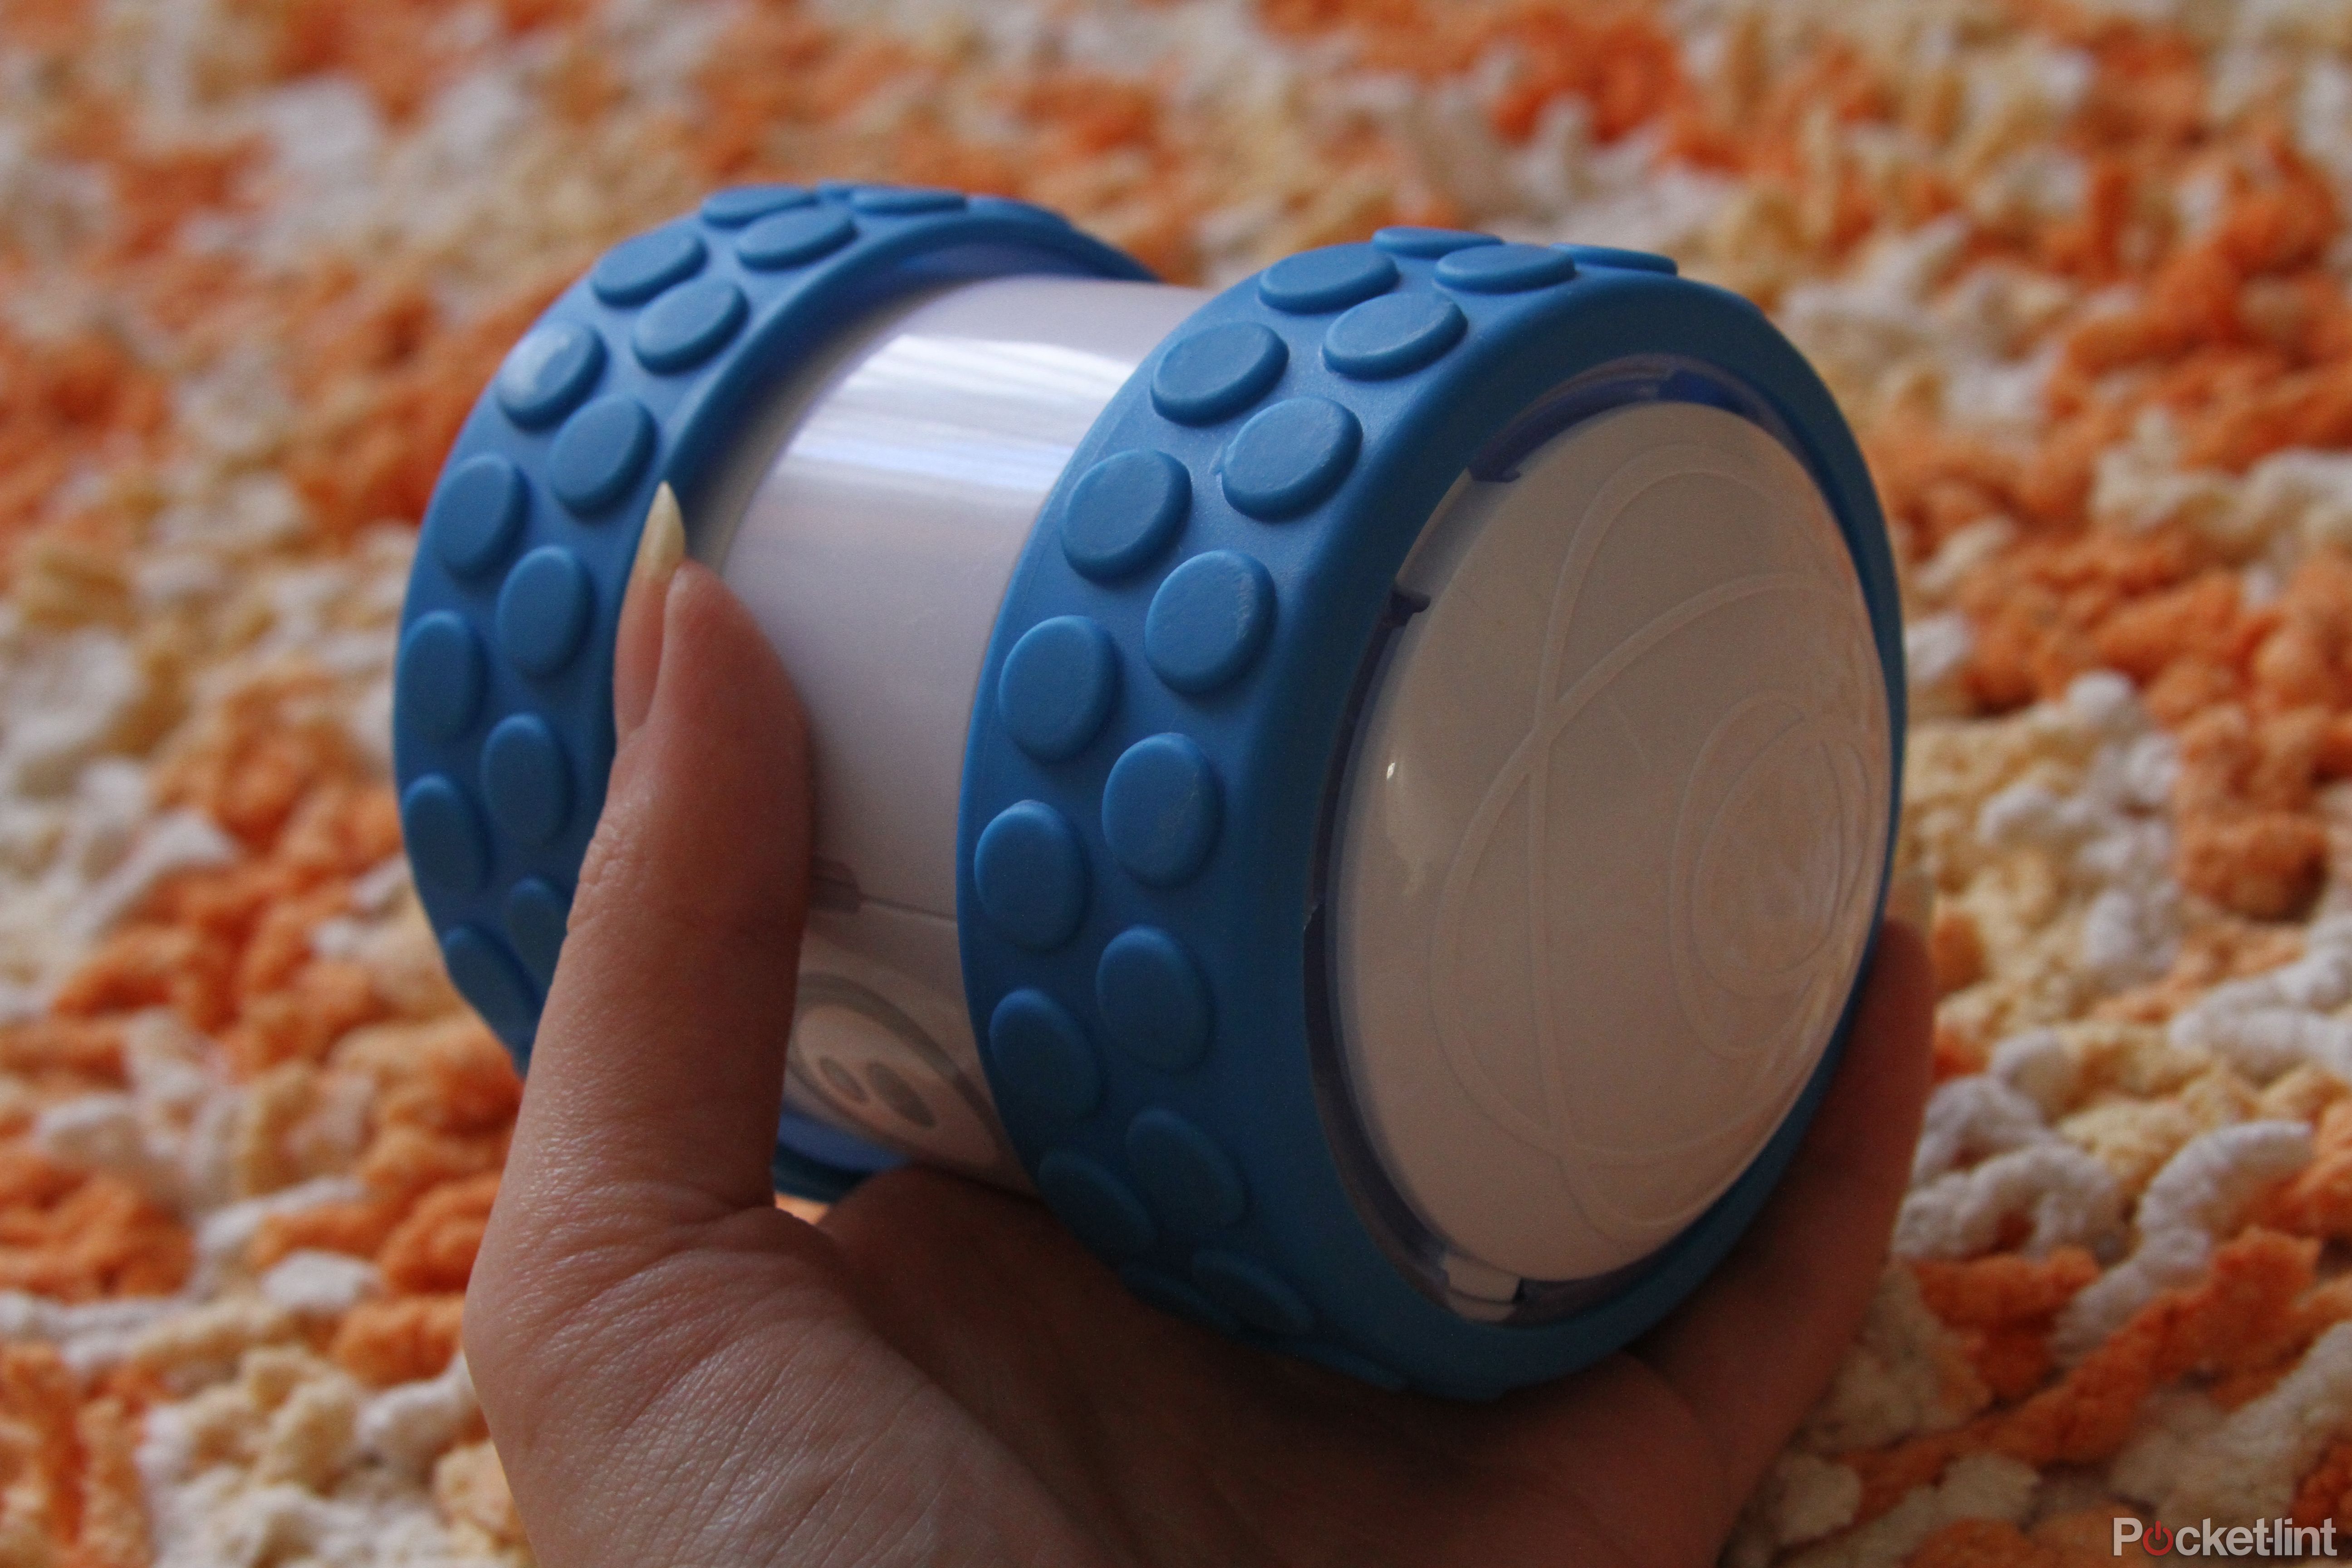 https://static0.pocketlintimages.com/wordpress/wp-content/uploads/wm/130719-parenting-news-hands-on-sphero-ollie-hands-on-review-cylindrical-fast-and-totally-cool-image5-o1YhViTF2C.jpg